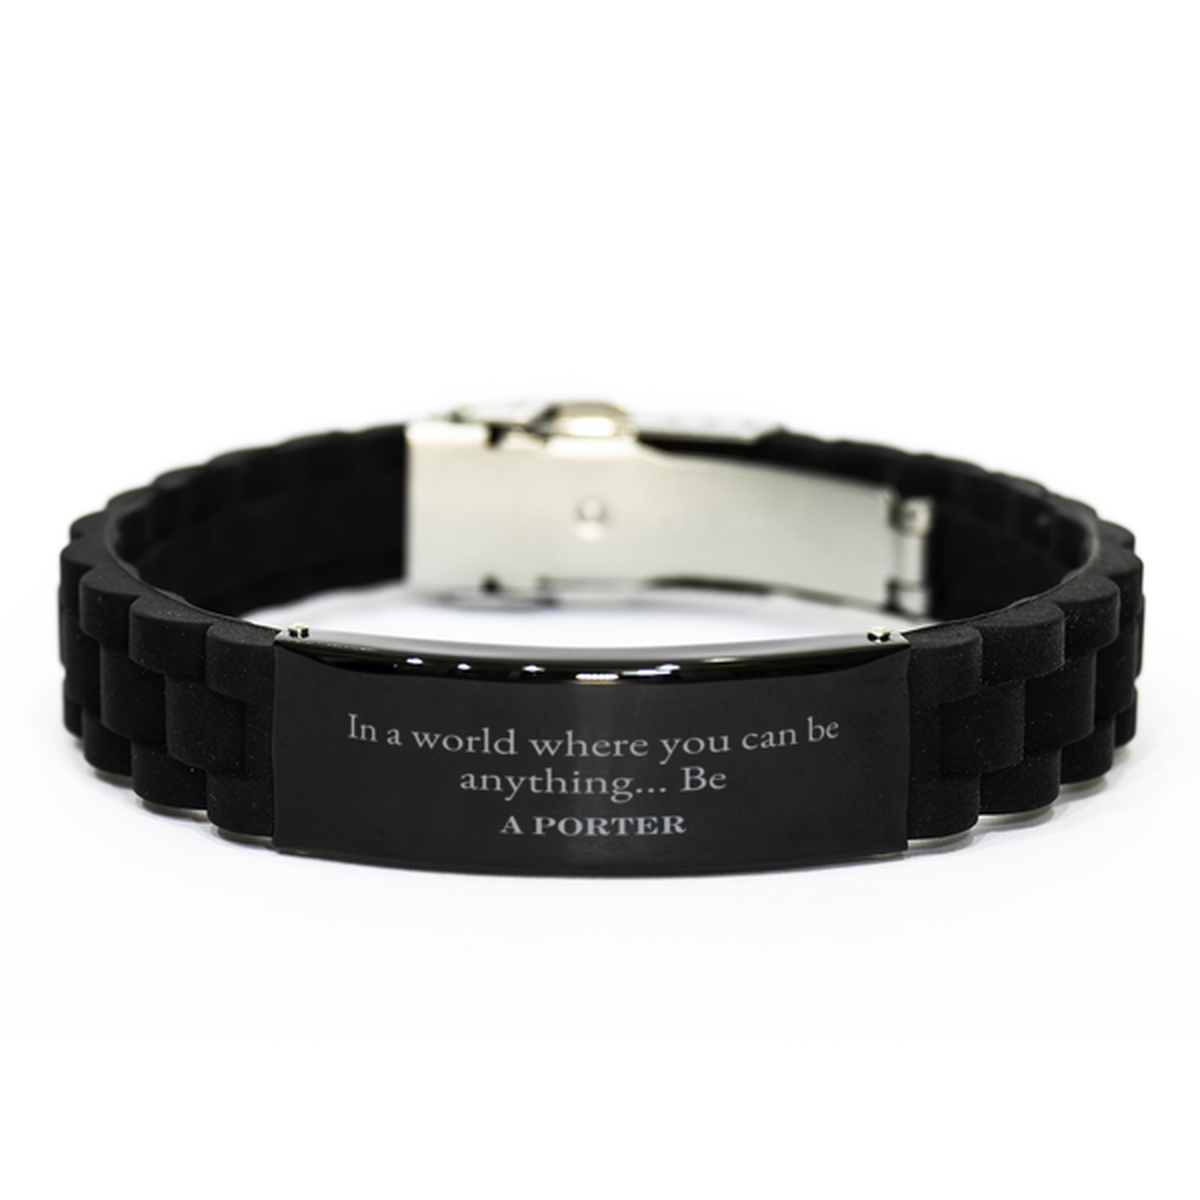 Gifts for Porter, In a world where you can be anything, Appreciation Birthday Black Glidelock Clasp Bracelet for Men, Women, Friends, Coworkers